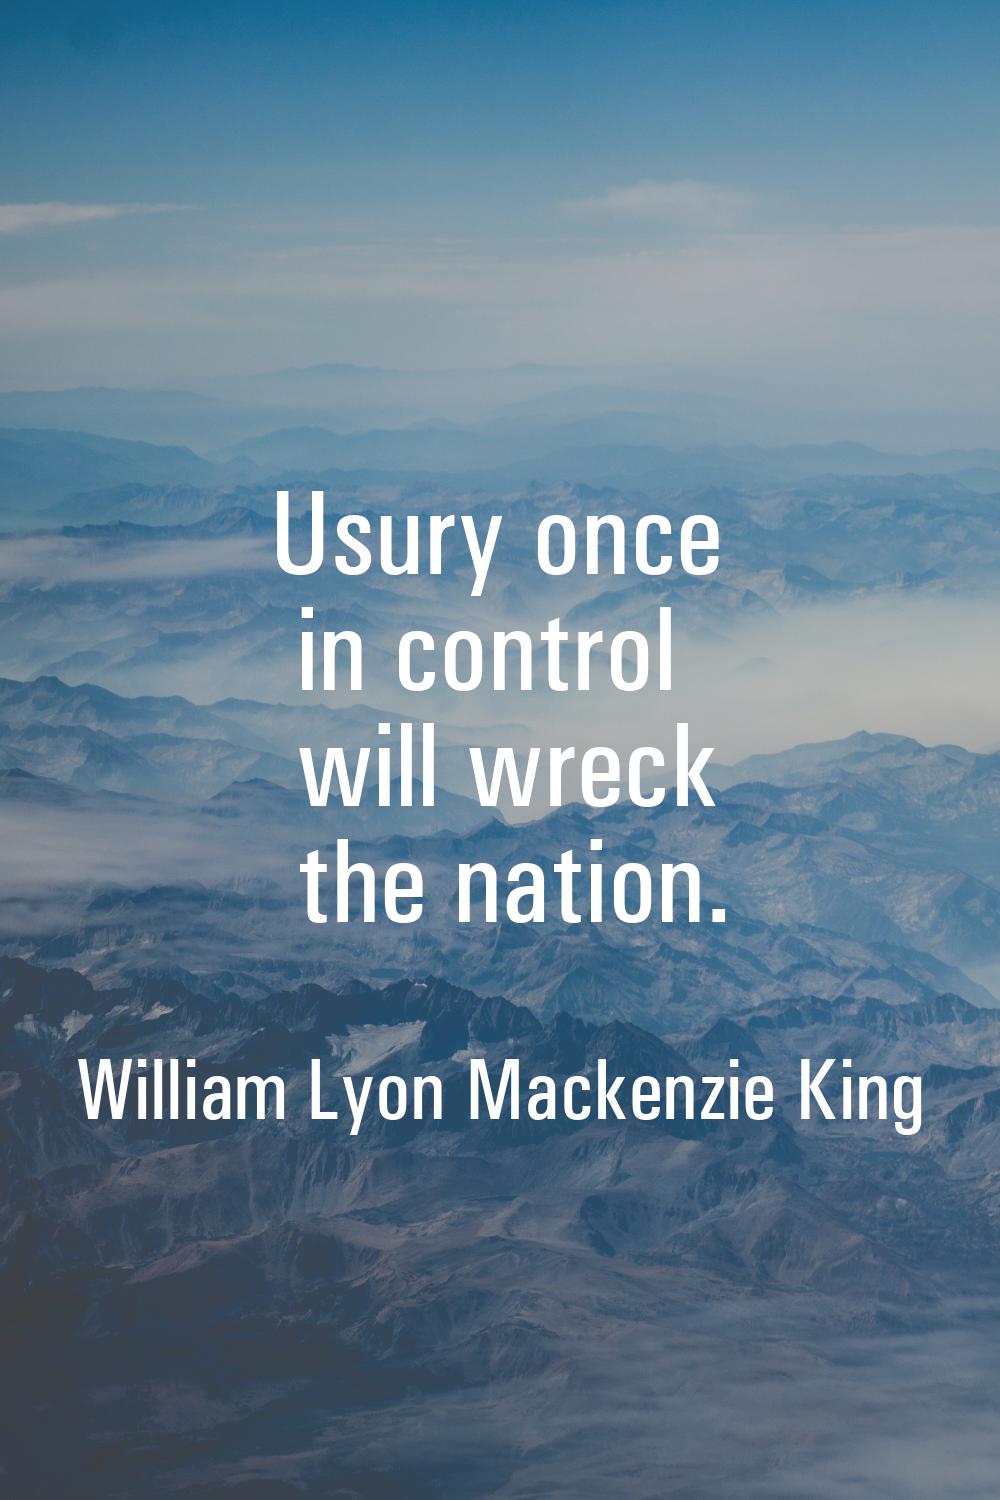 Usury once in control will wreck the nation.